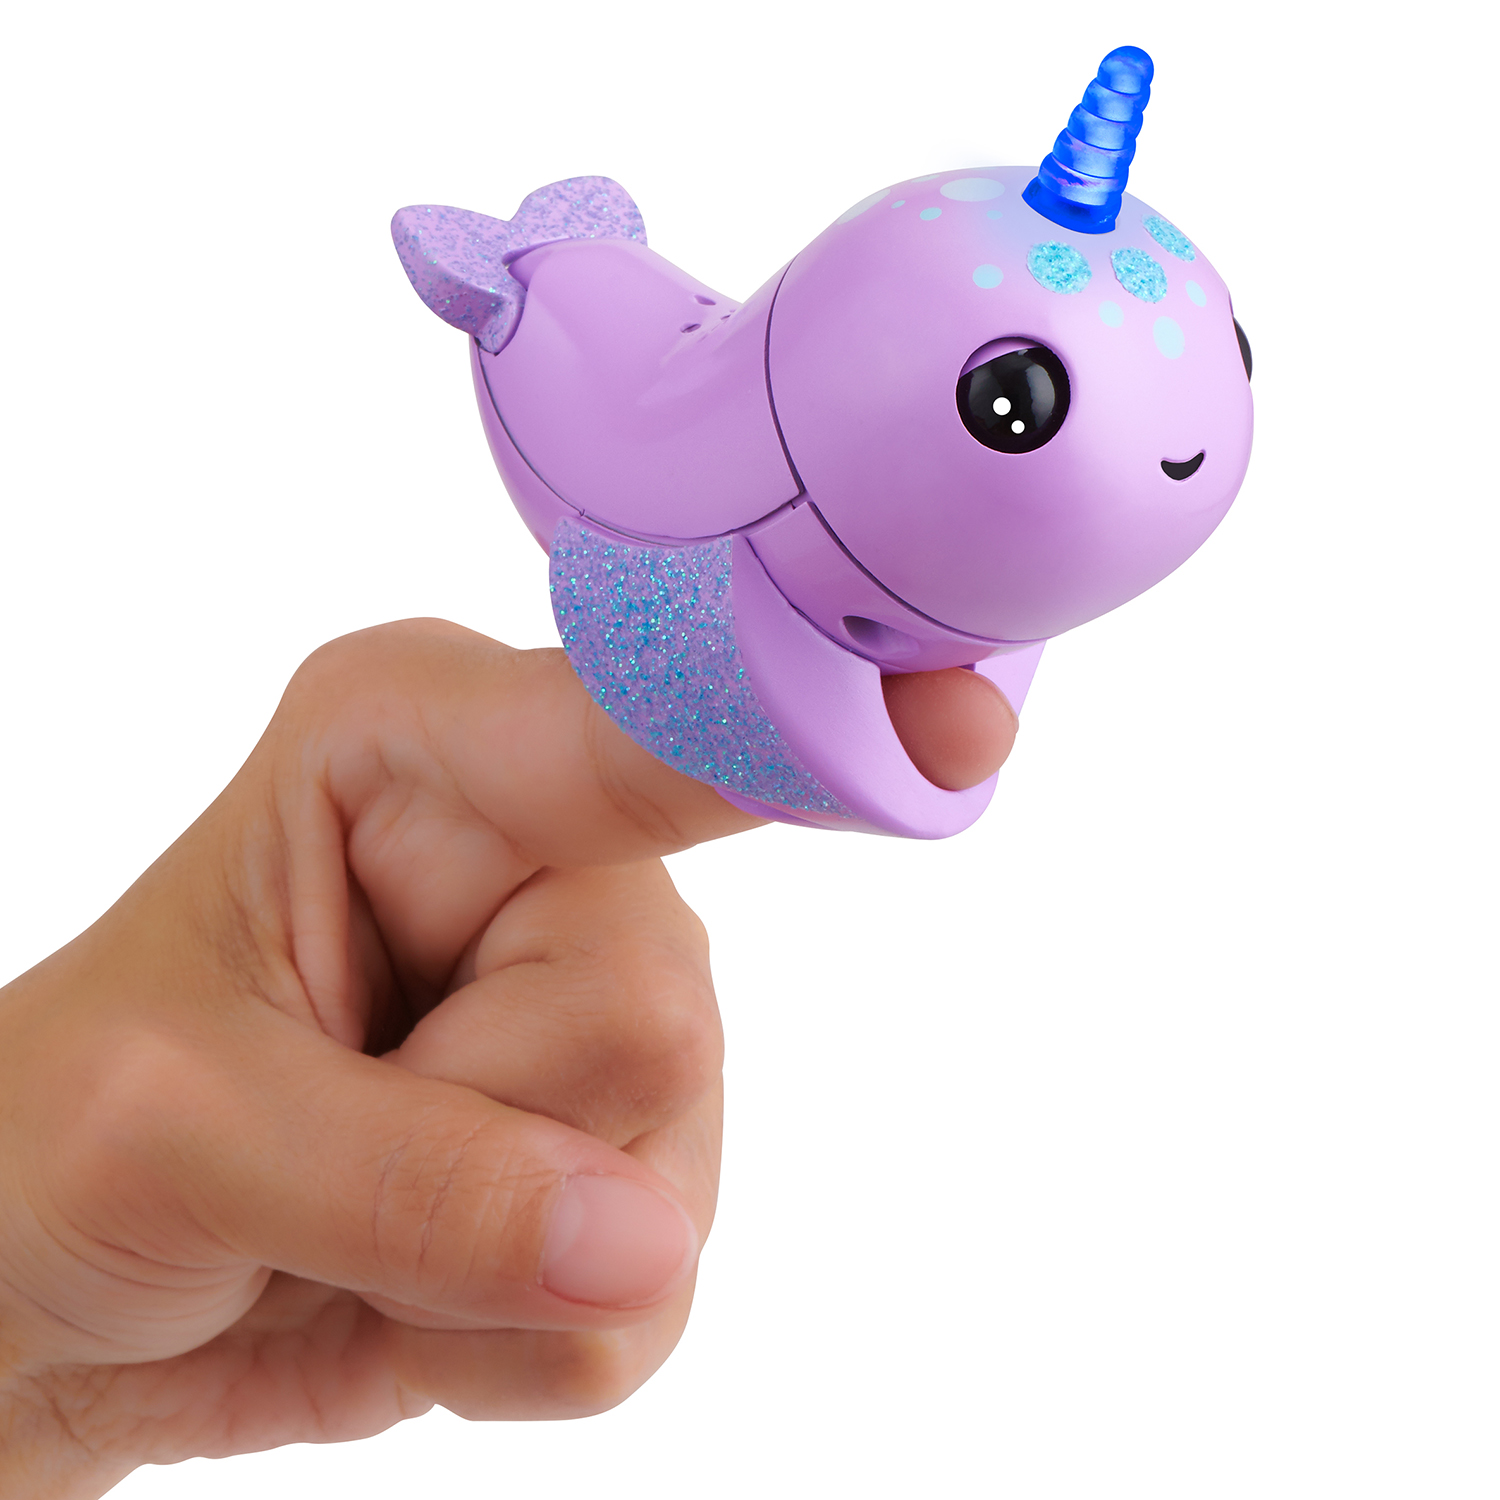 Fingerlings Light Up Narwhal - Nelly (Purple) - Friendly Interactive Toy by WowWee - image 3 of 10